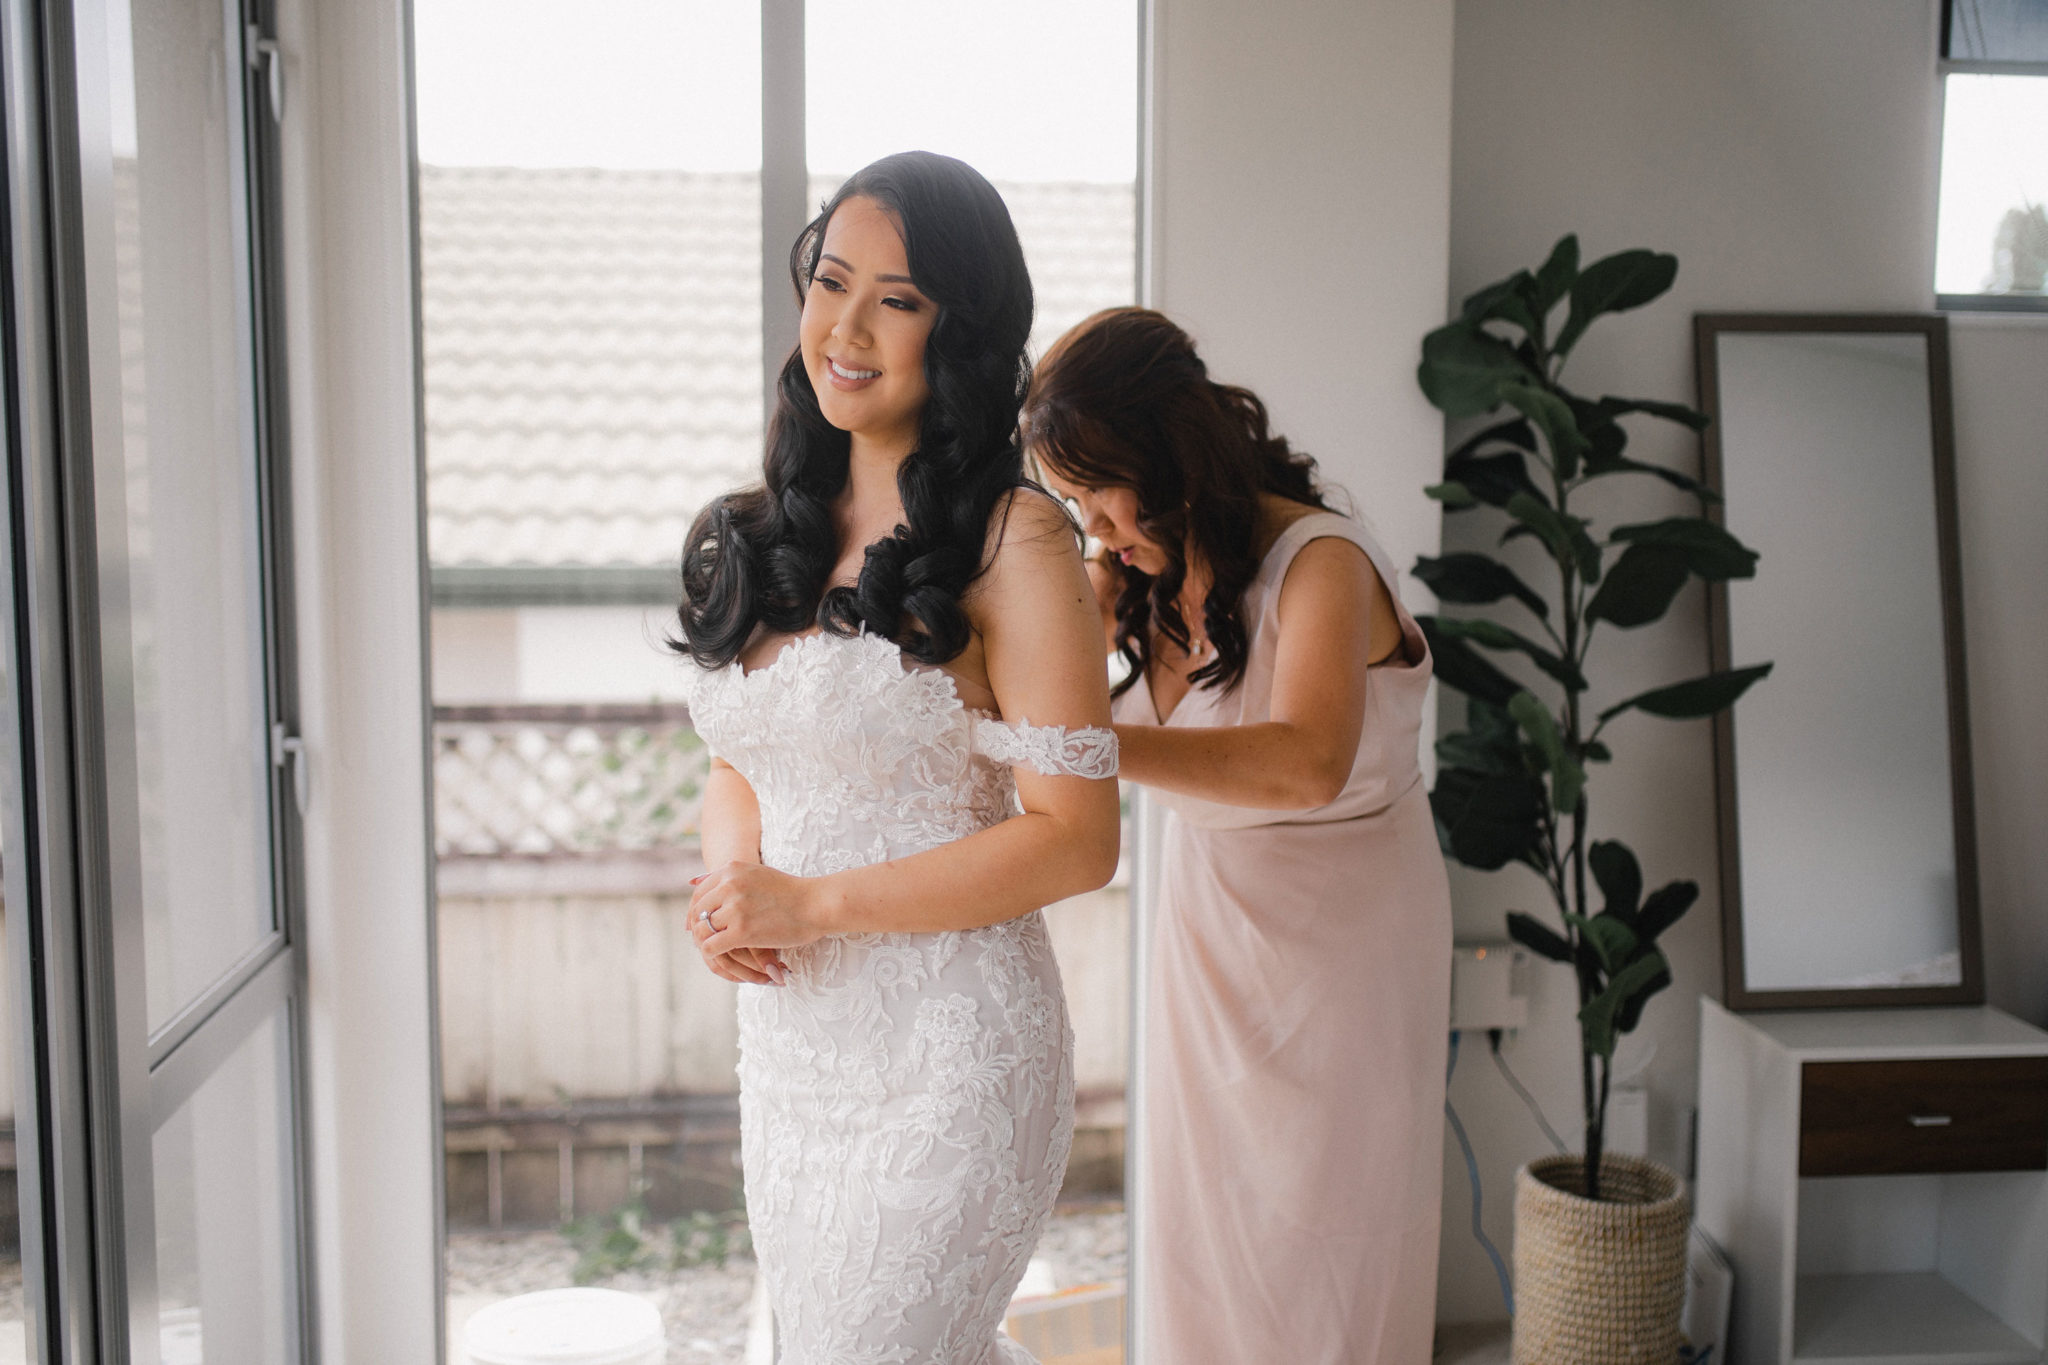 mother helping the bride into her dress